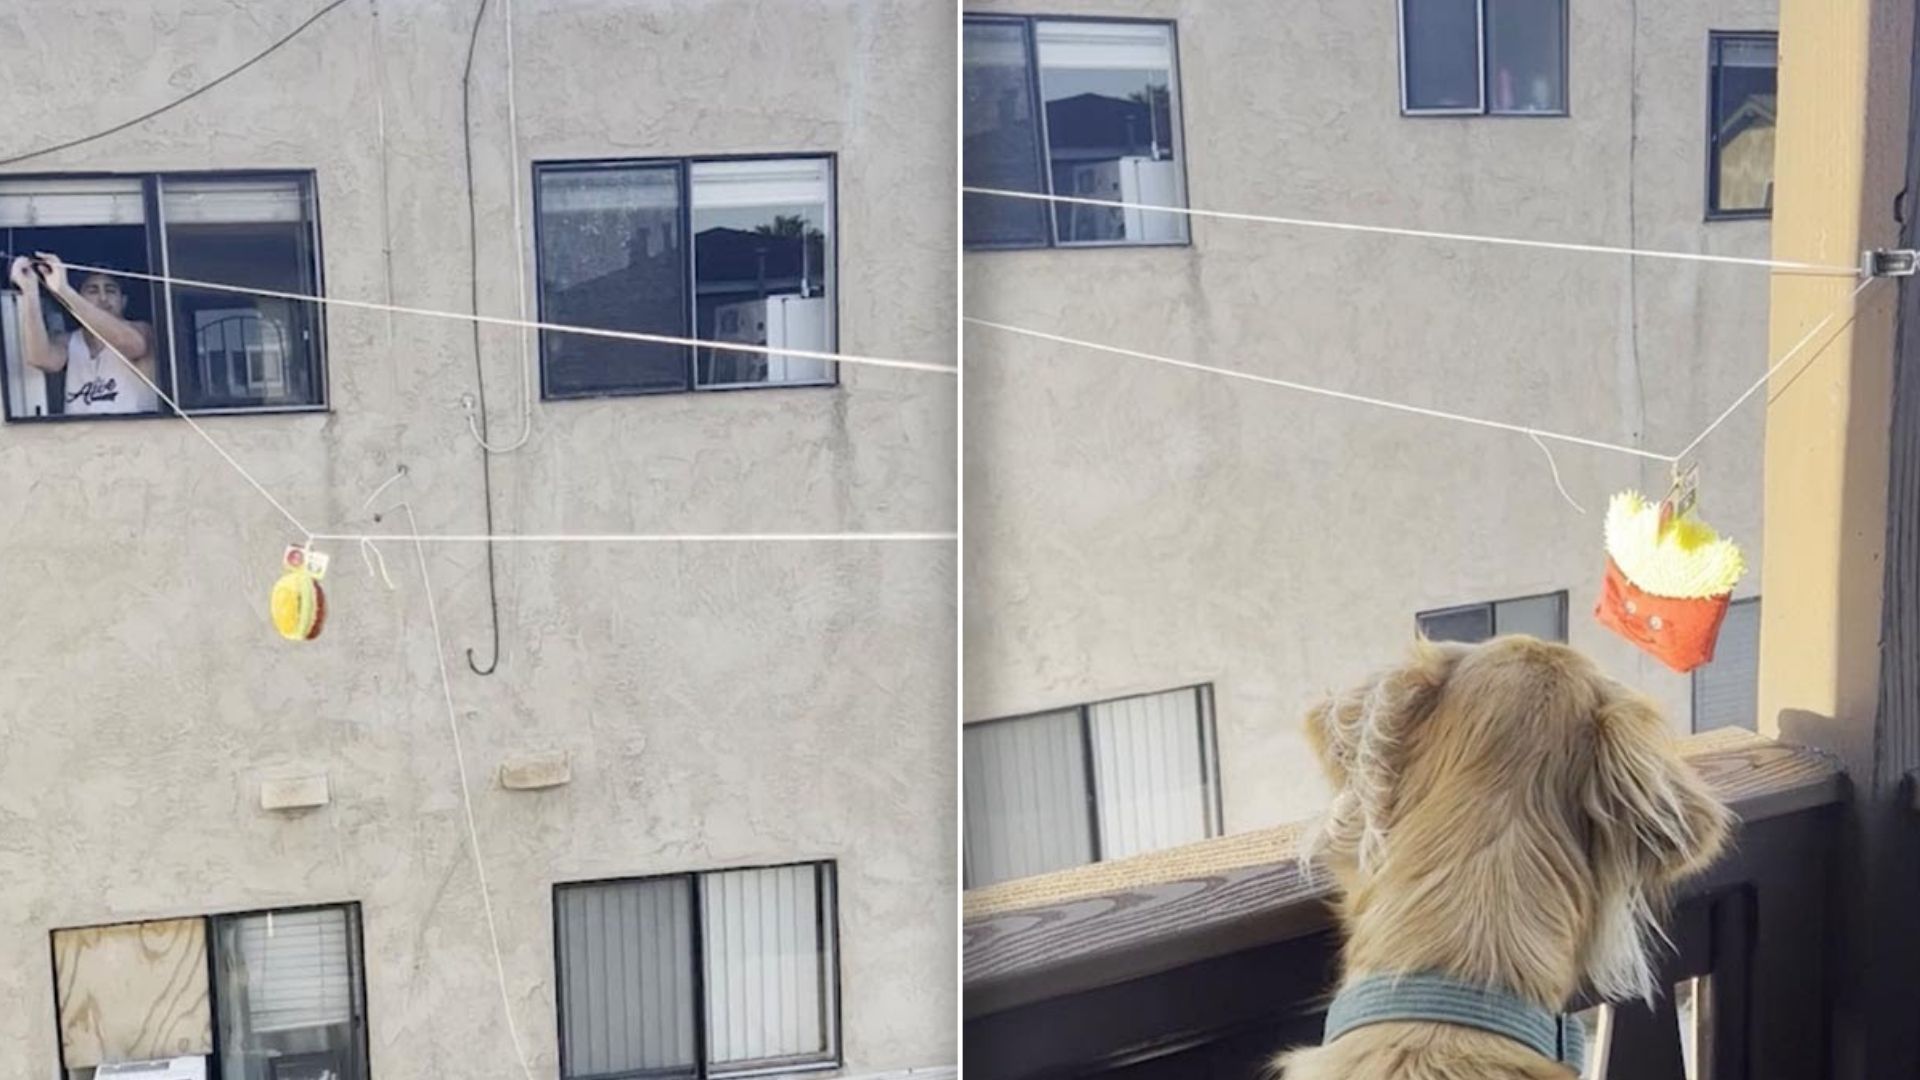 Watch This Golden Retriever Receiving Treats In The Most Ingenious Way